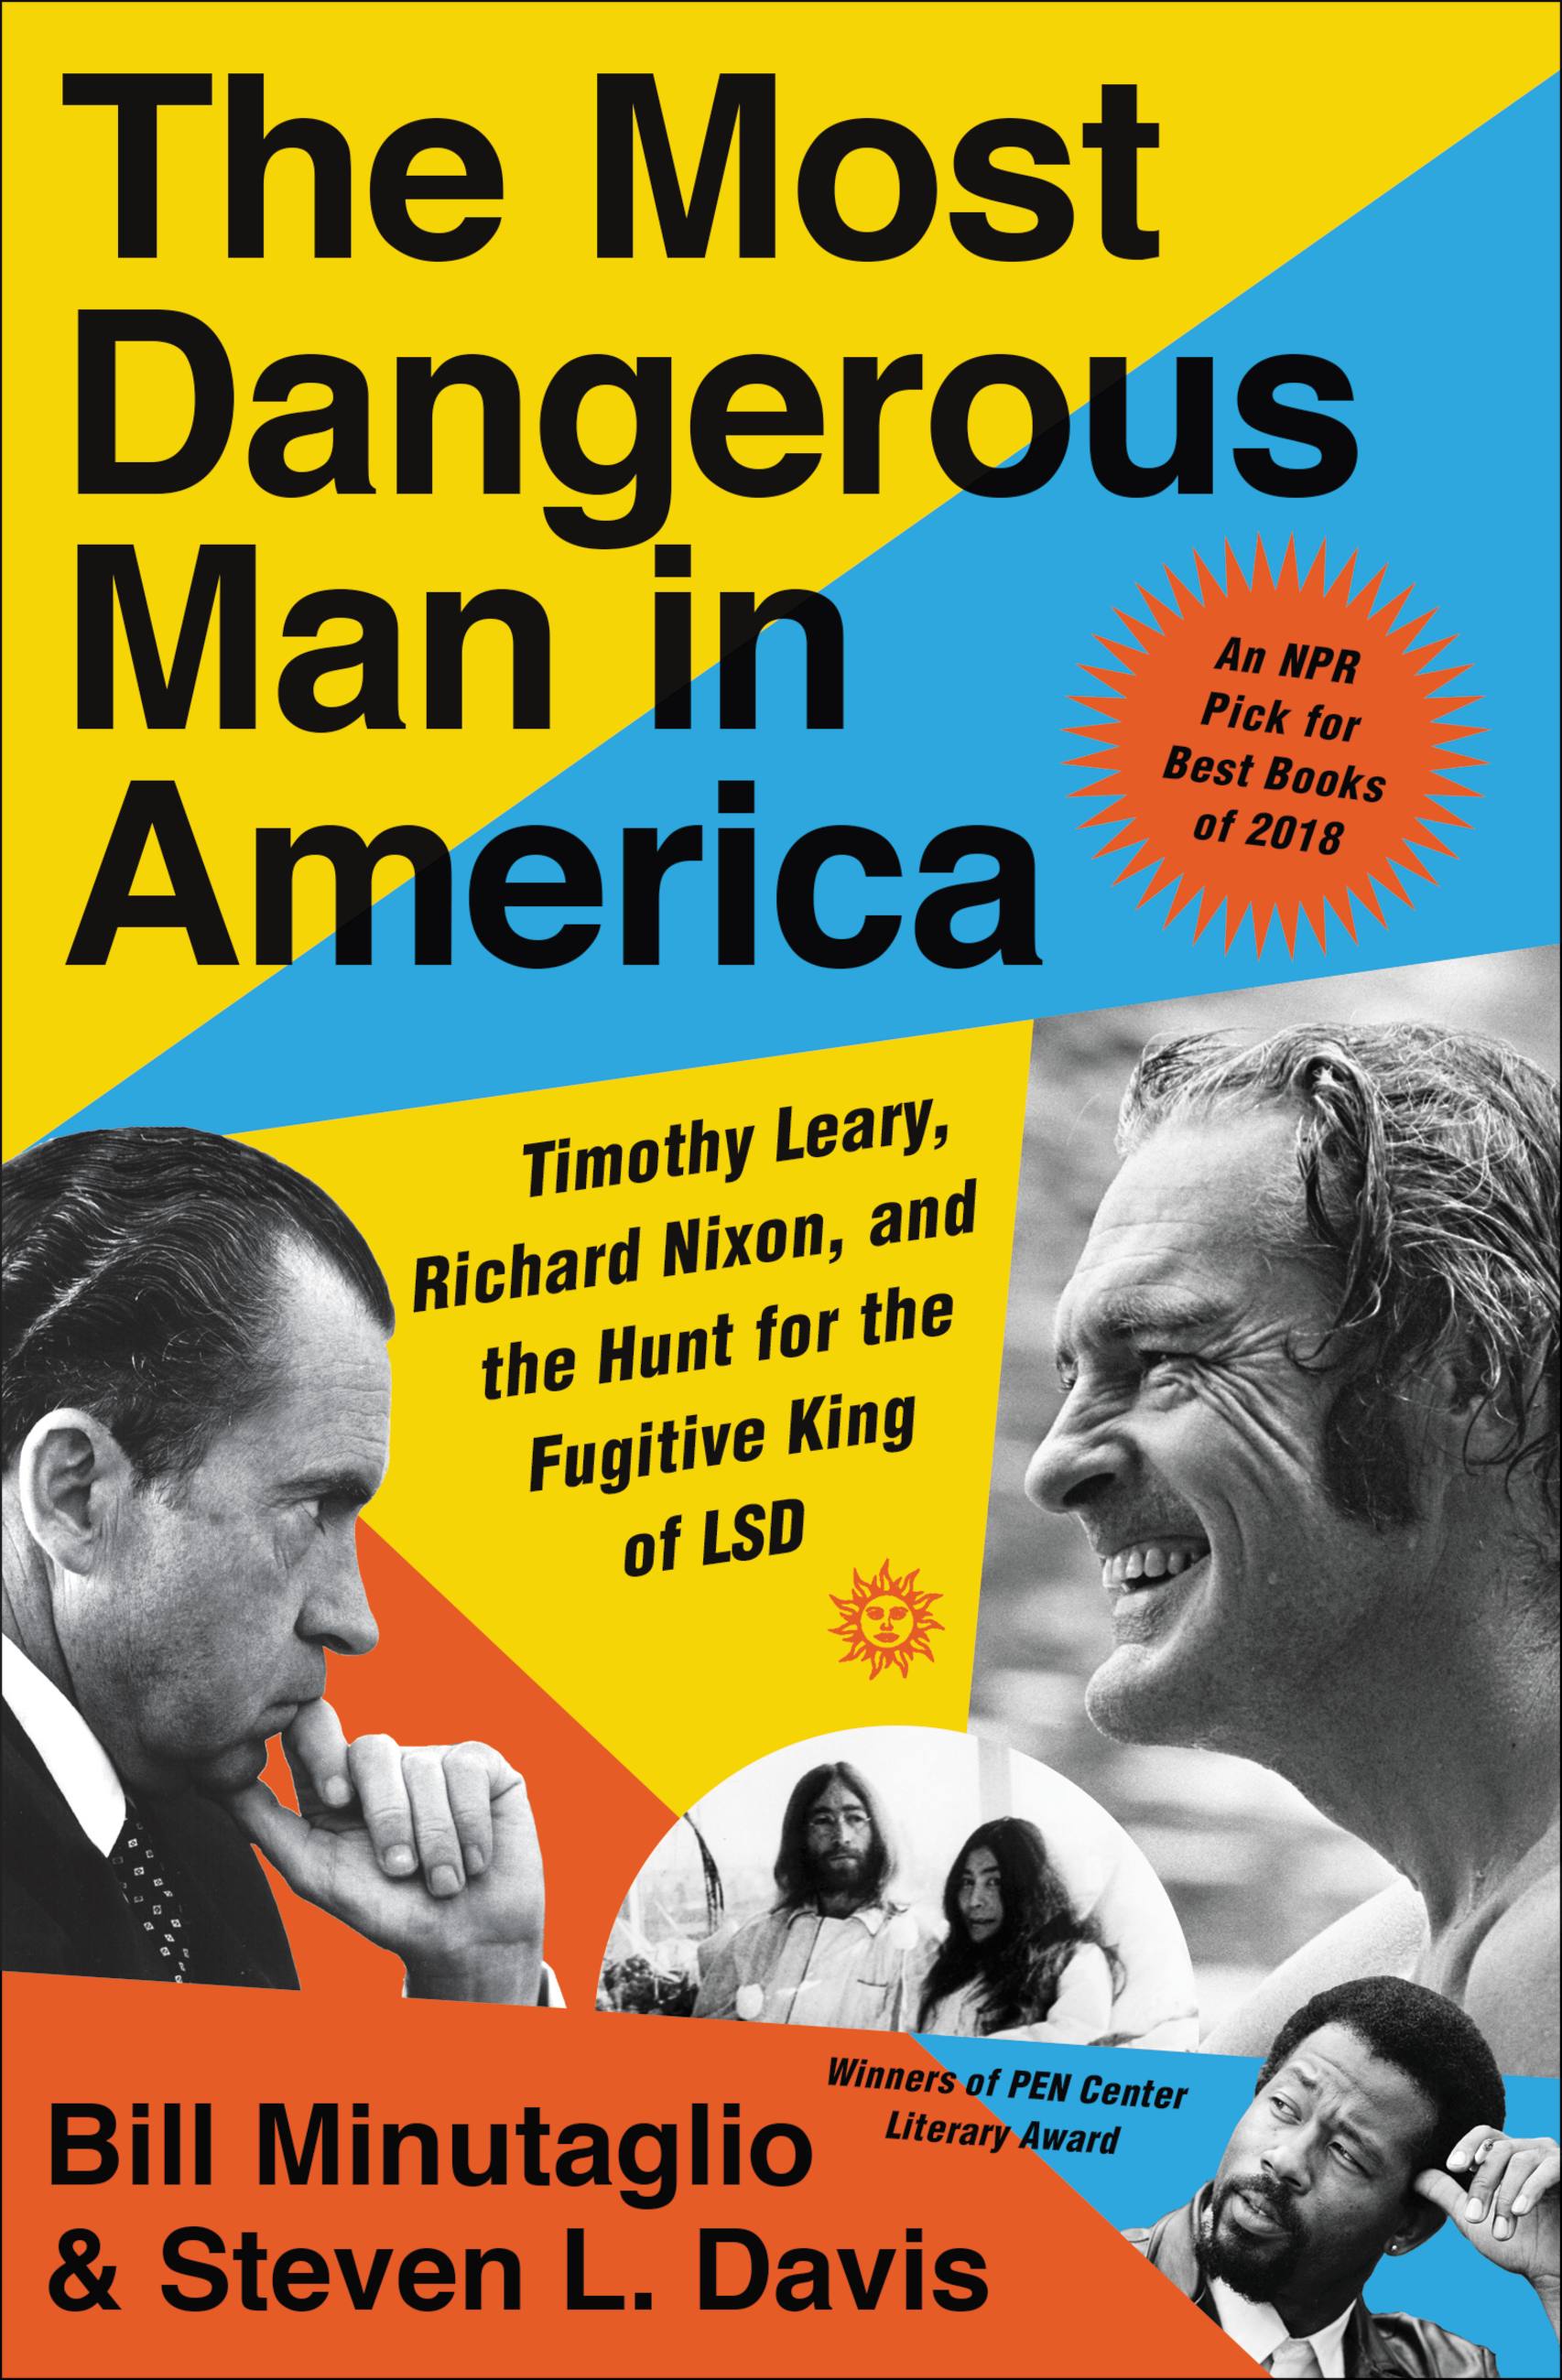 Umschlagbild für The Most Dangerous Man in America [electronic resource] : Timothy Leary, Richard Nixon and the Hunt for the Fugitive King of LSD